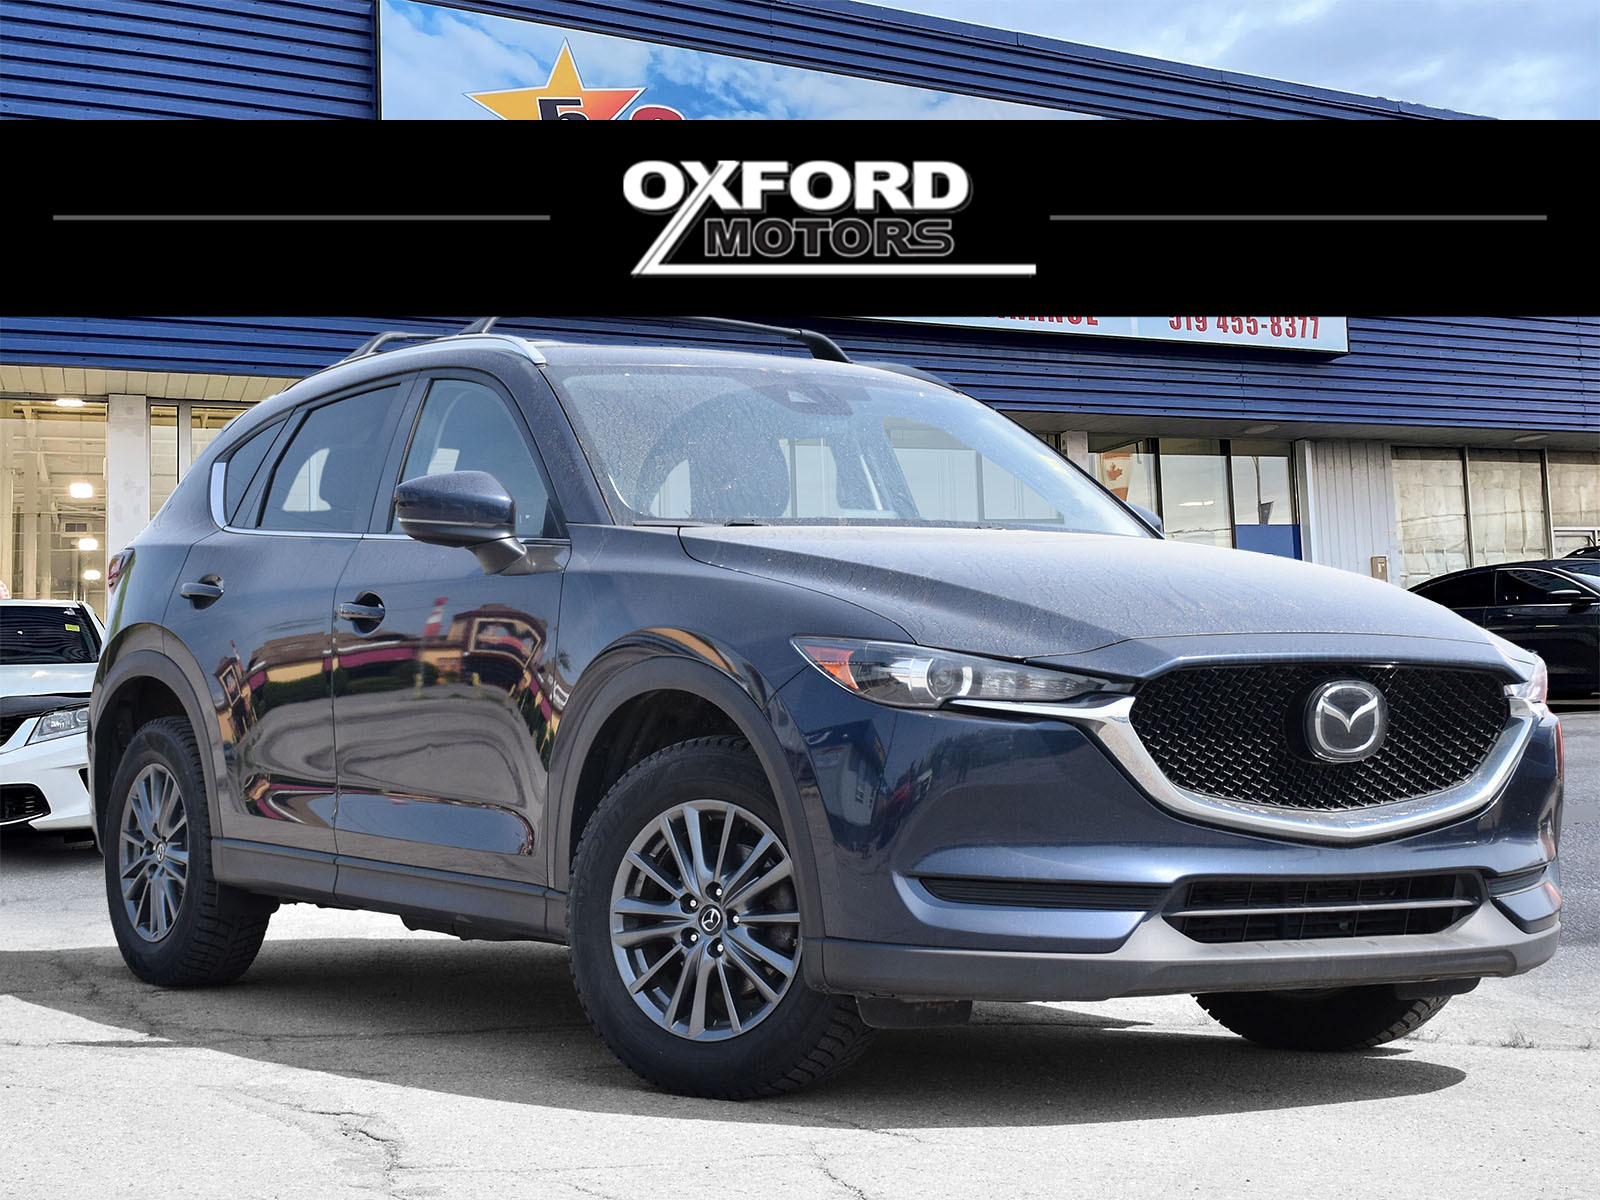 2019 Mazda CX-5 FWD LEATHER R-CAM MINT! WE FINANCE ALL CREDIT!